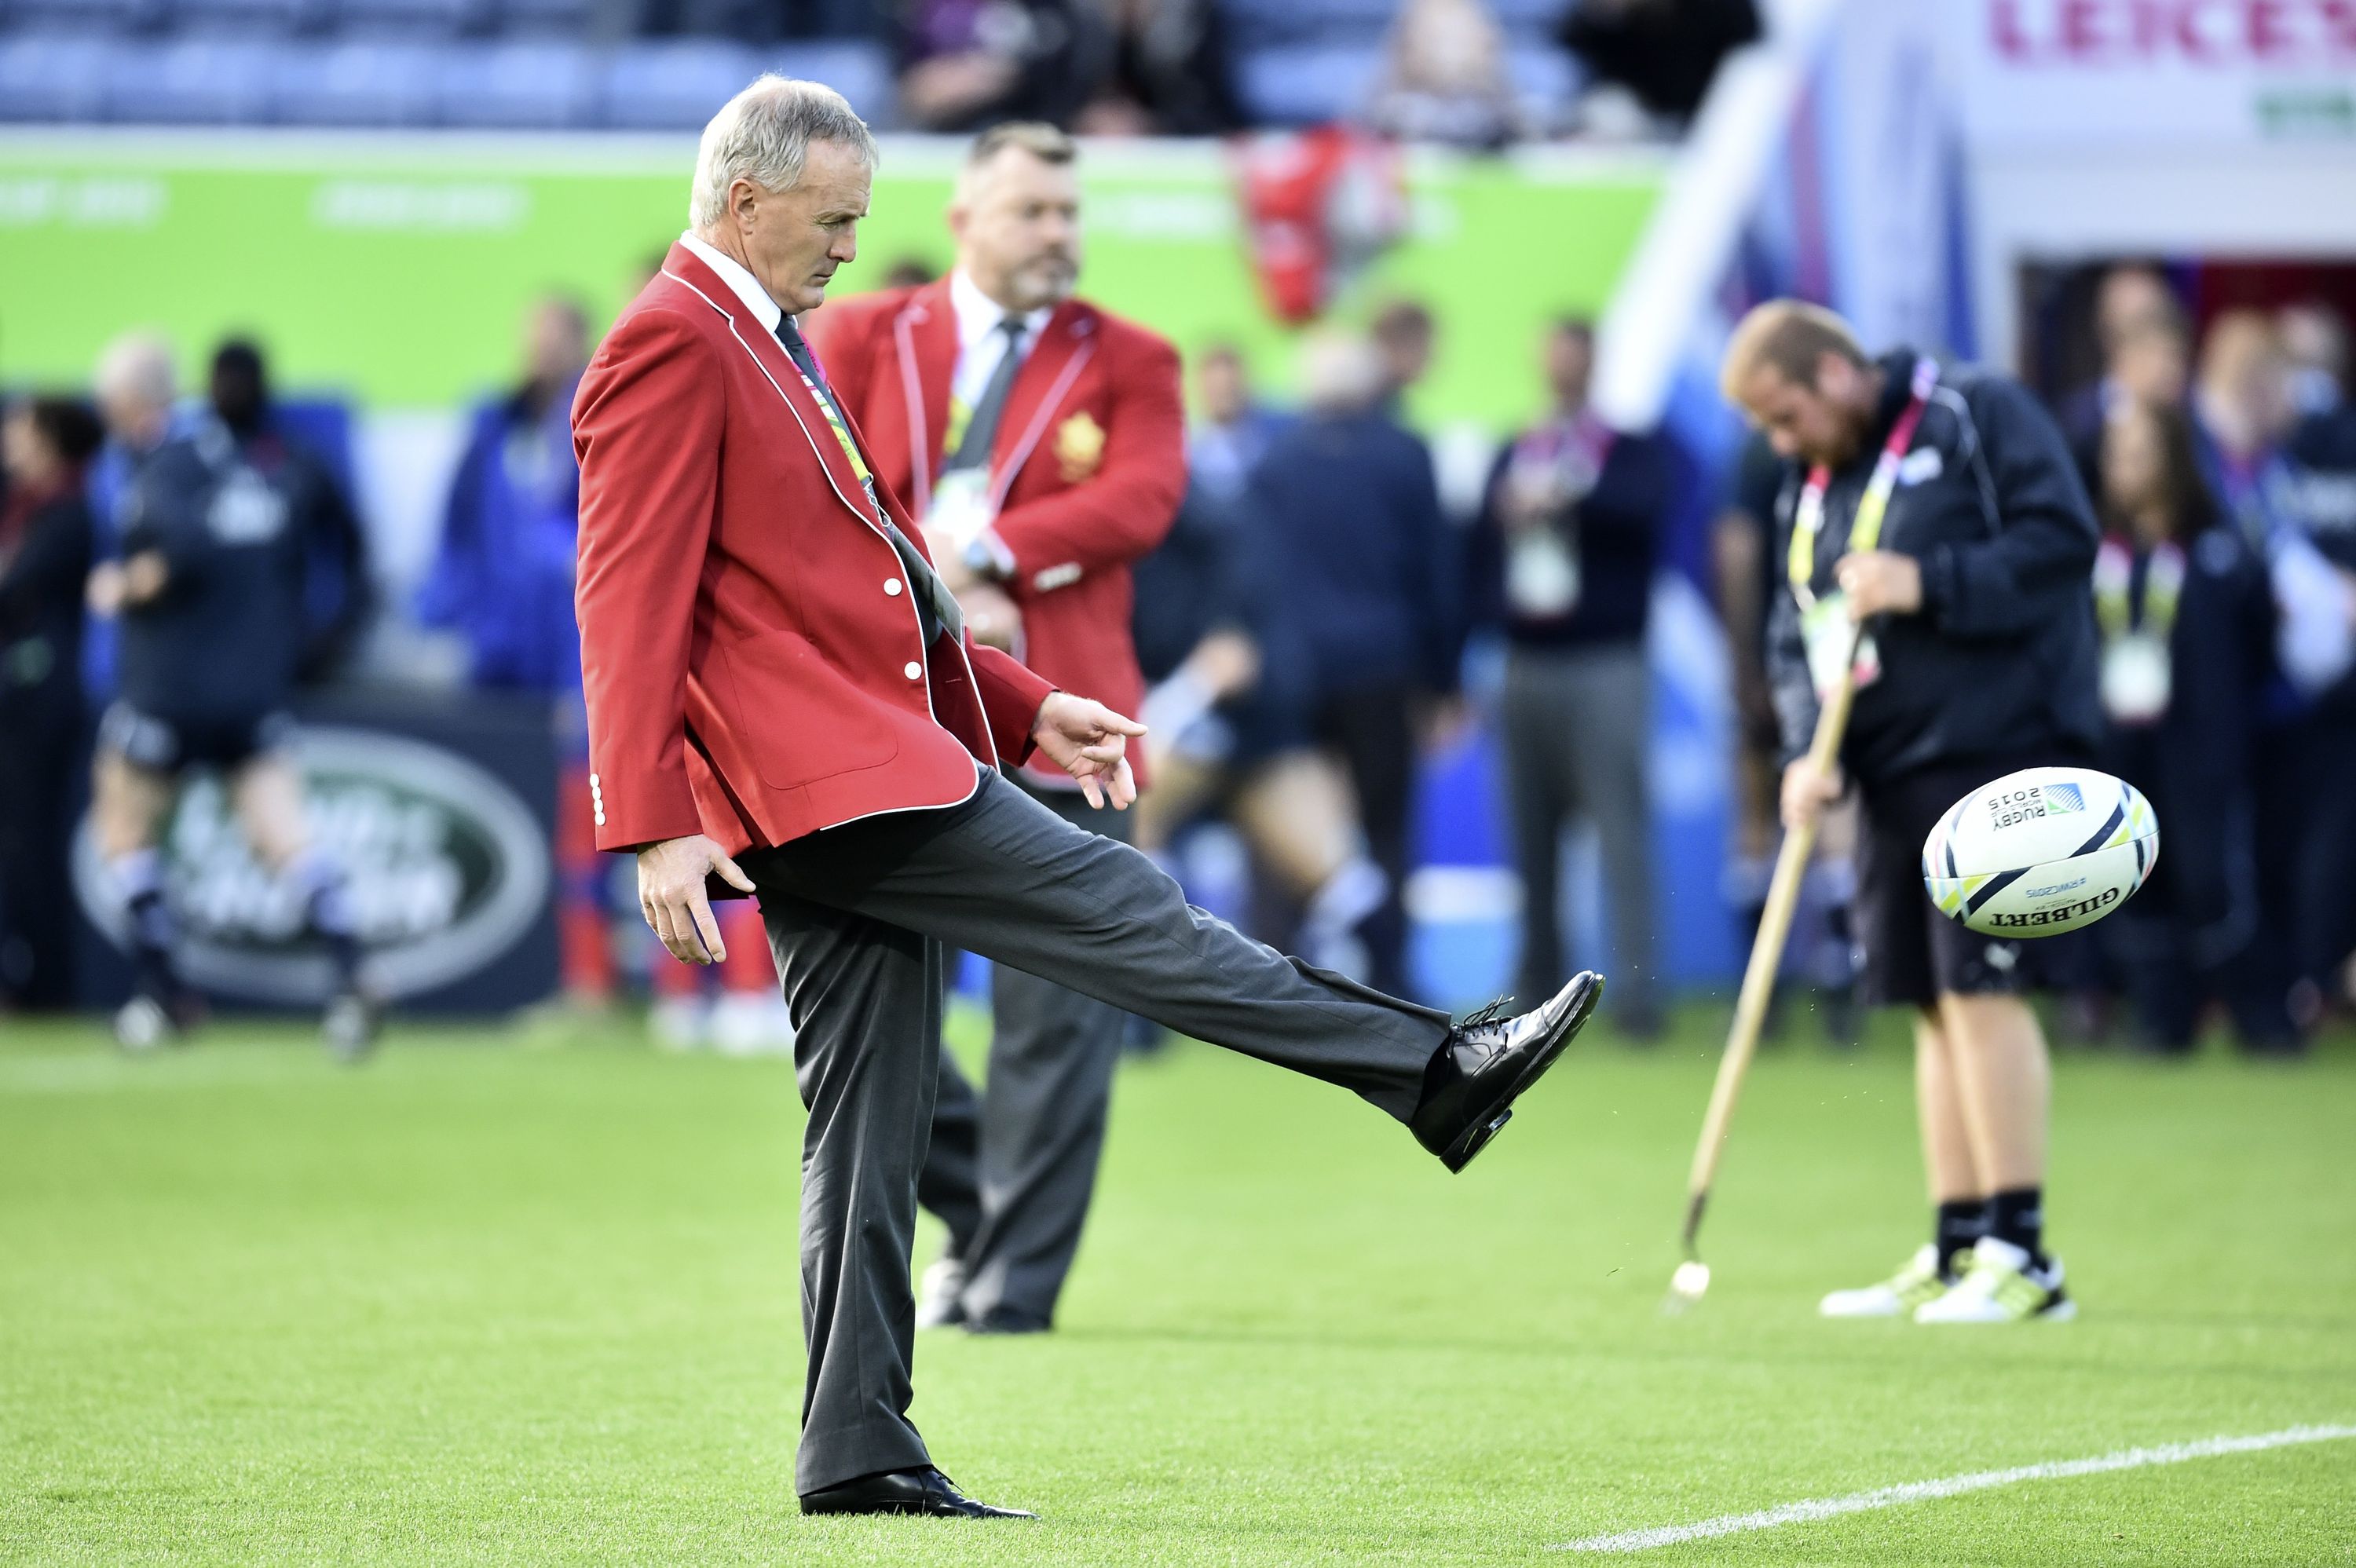 Canada's head coach Kieran Crowley kicks a ball before the start of the Pool D match of the 2015 Rugby World Cup between Canada and Romania at Leicester City Stadium in Leicester, central England, on October 6, 2015.  AFP PHOTO / BERTRAND LANGLOIS RESTRICTED TO EDITORIAL USE, NO USE IN LIVE MATCH TRACKING SERVICES, TO BE USED AS NON-SEQUENTIAL STILLS        (Photo credit should read BERTRAND LANGLOIS/AFP/Getty Images)